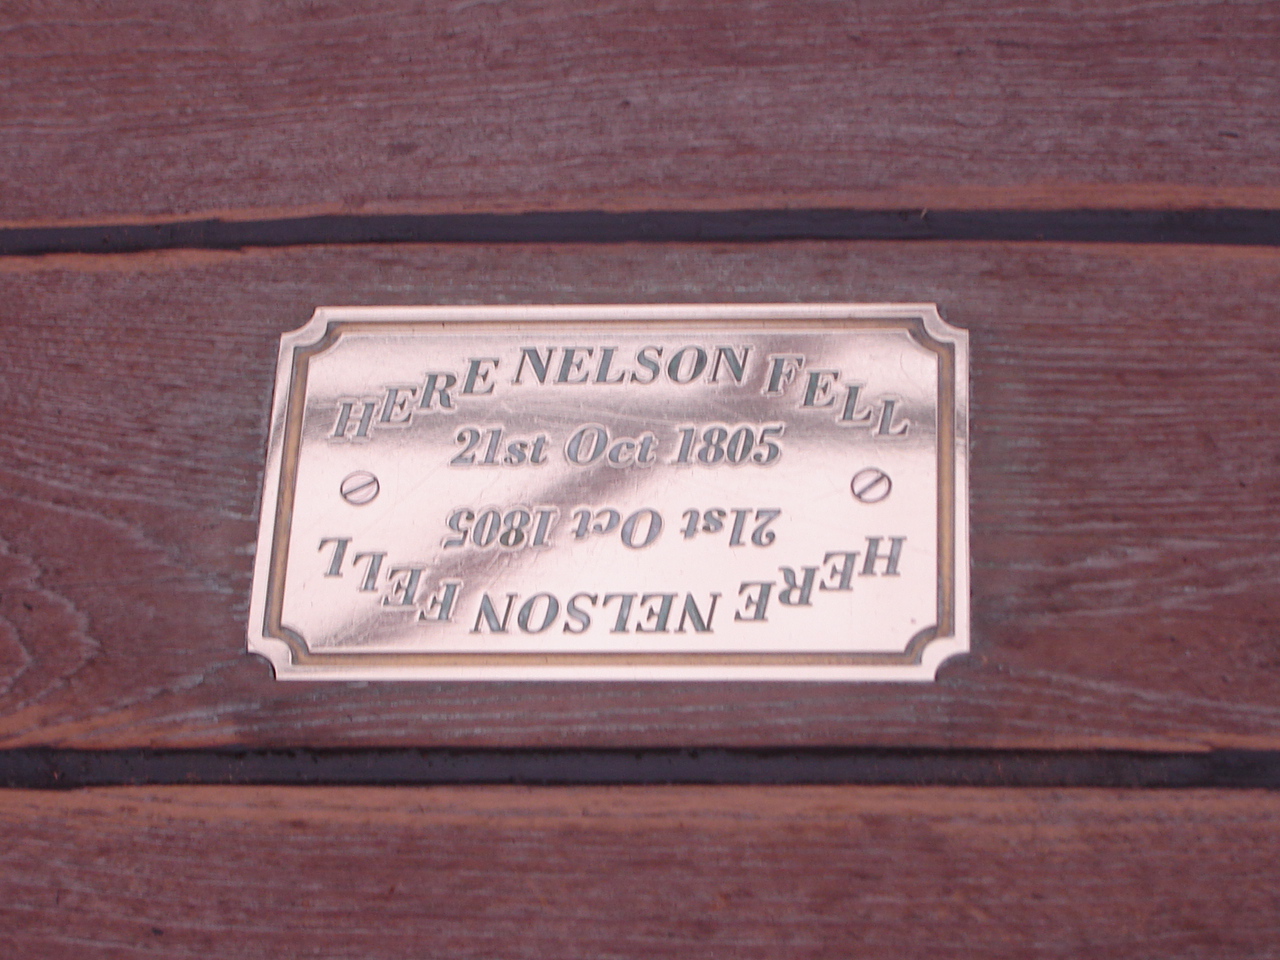 The plaque commemorating Nelson